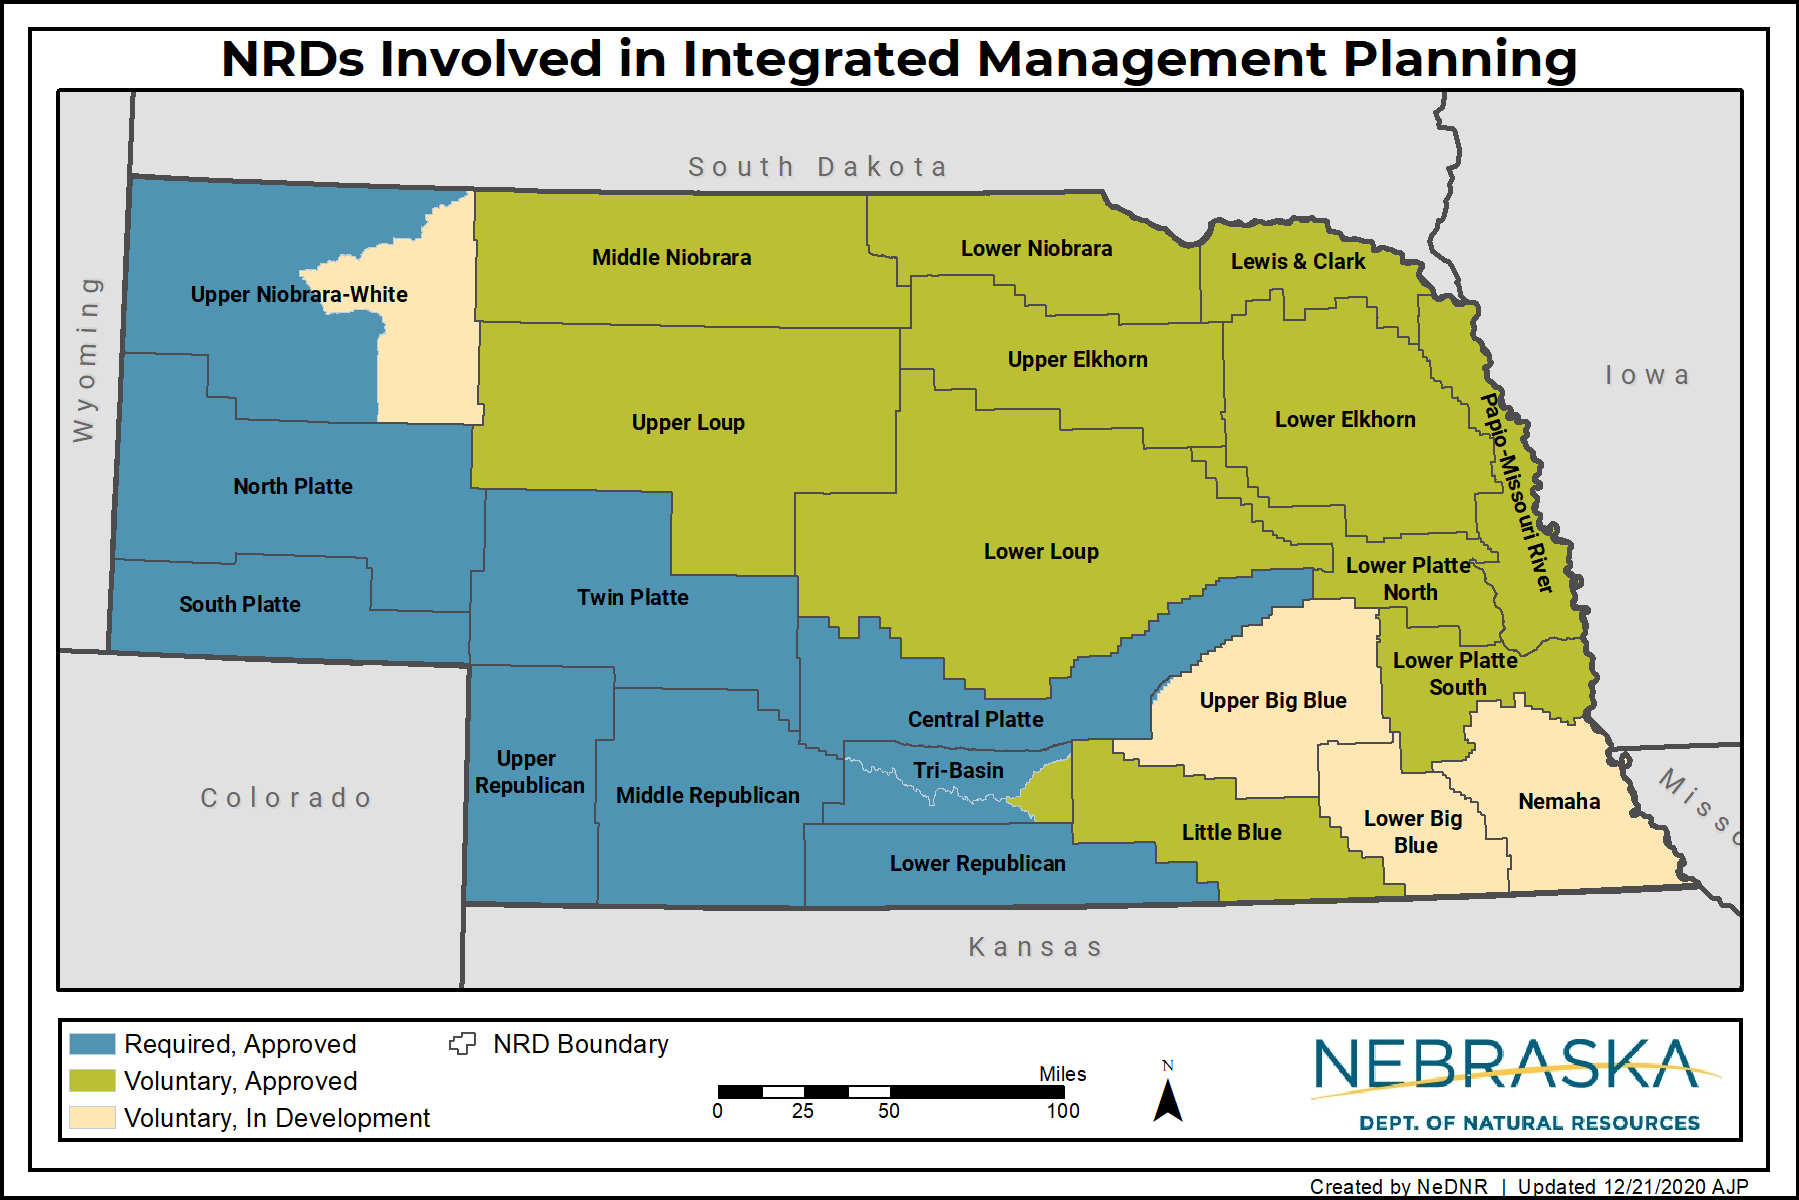 Map of Areas Involved in IMP Planning